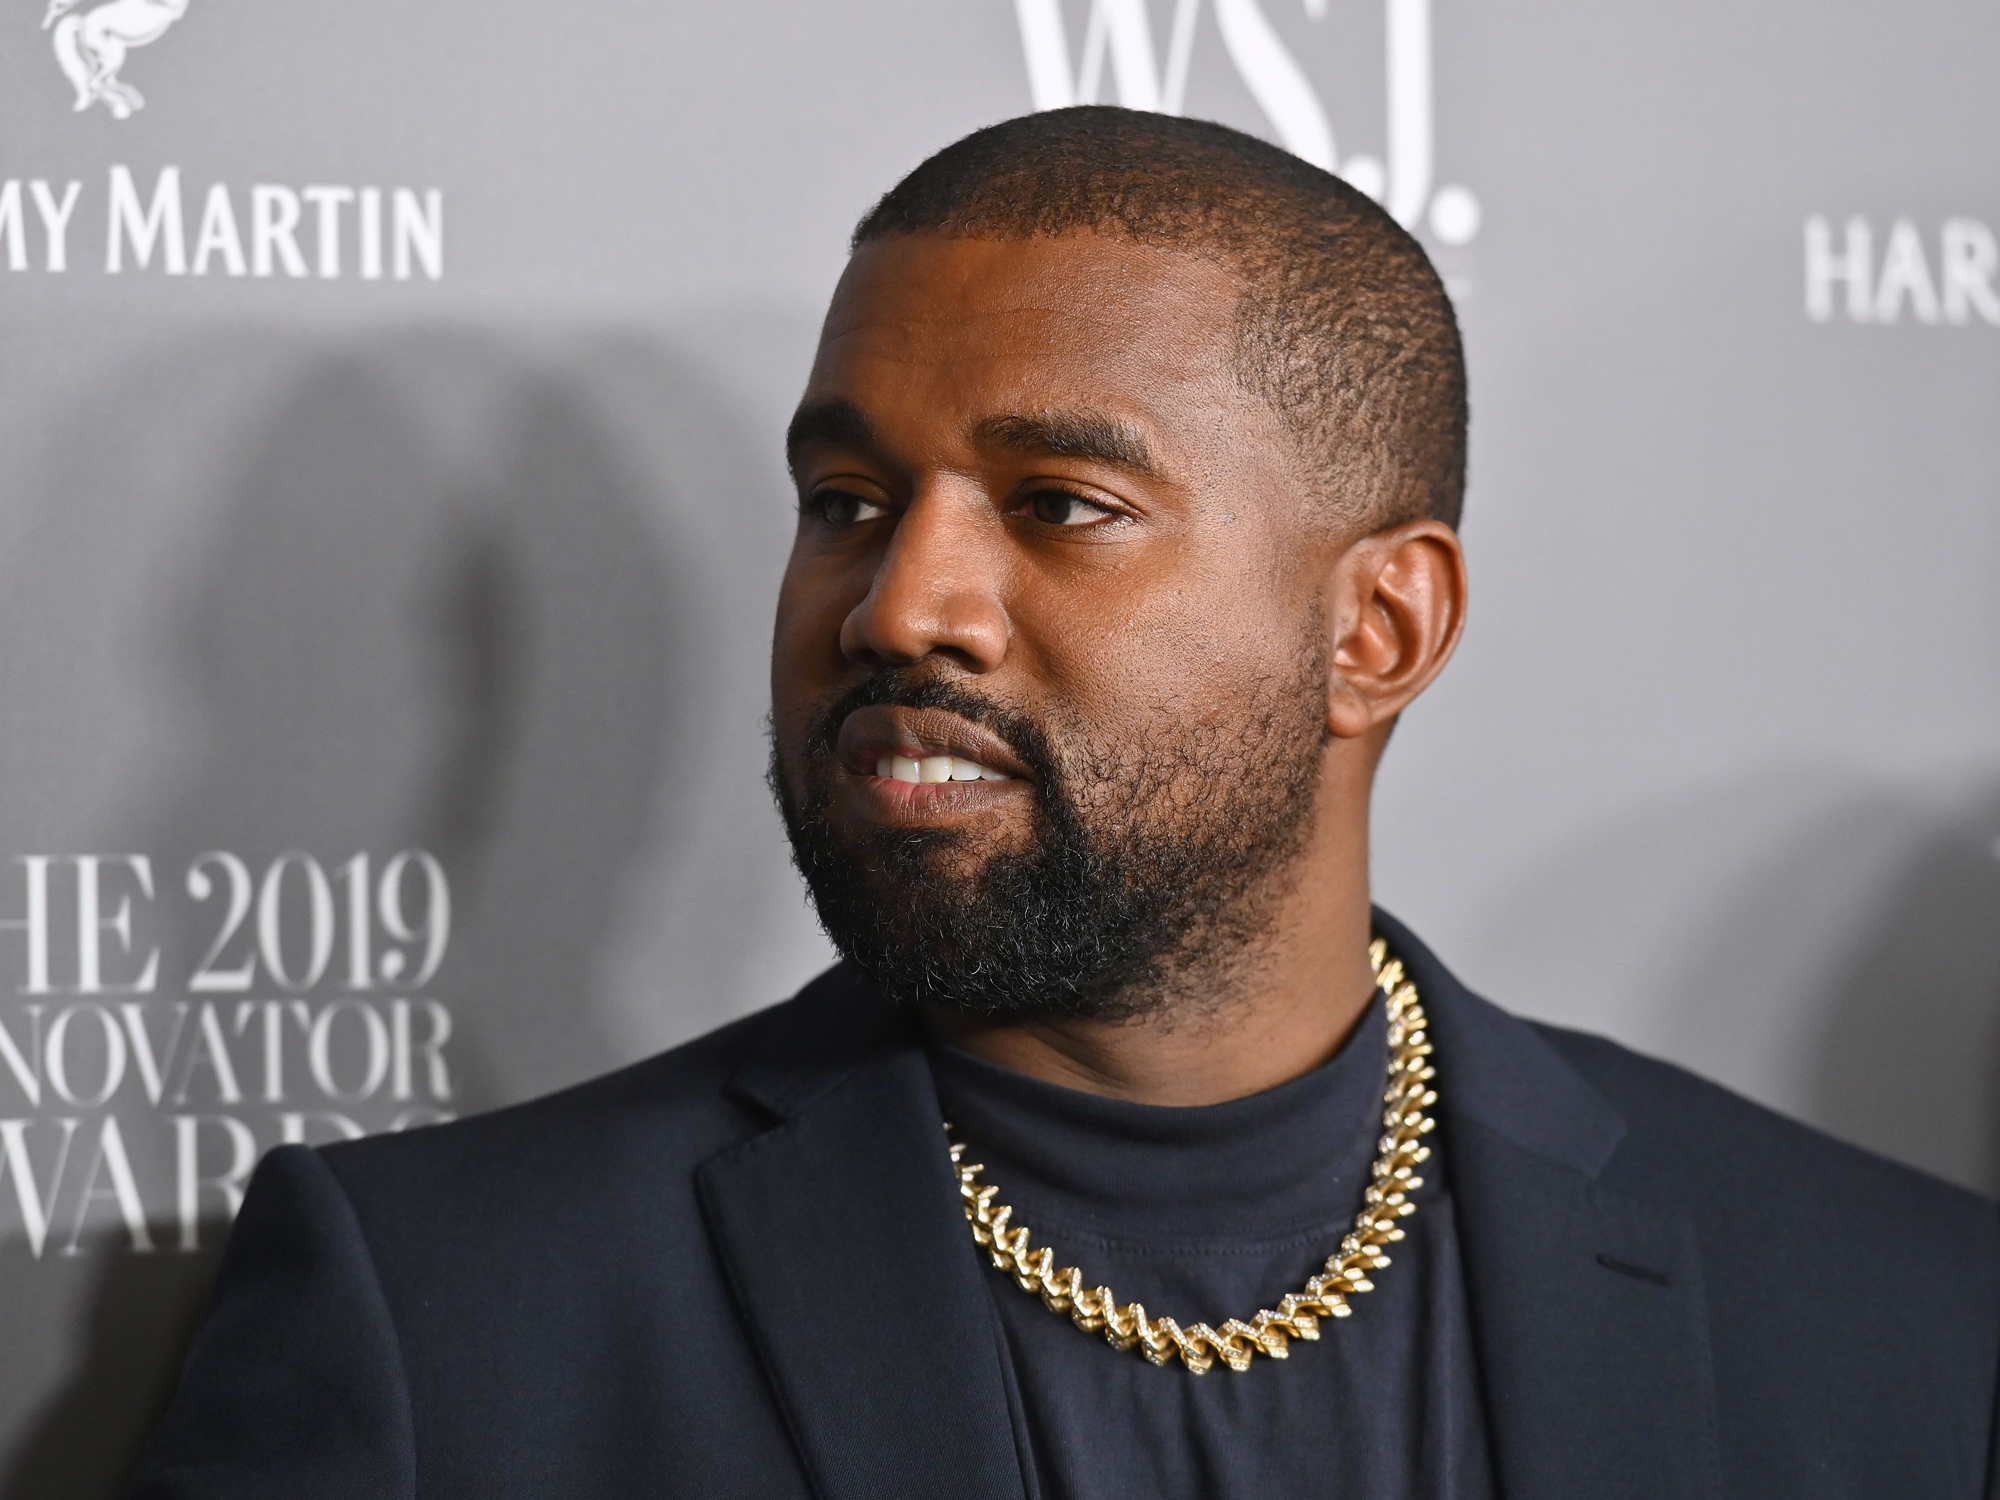 Kanye West (Ye) Drops Off Forbes Billionaires' List as Adidas Cuts Ties